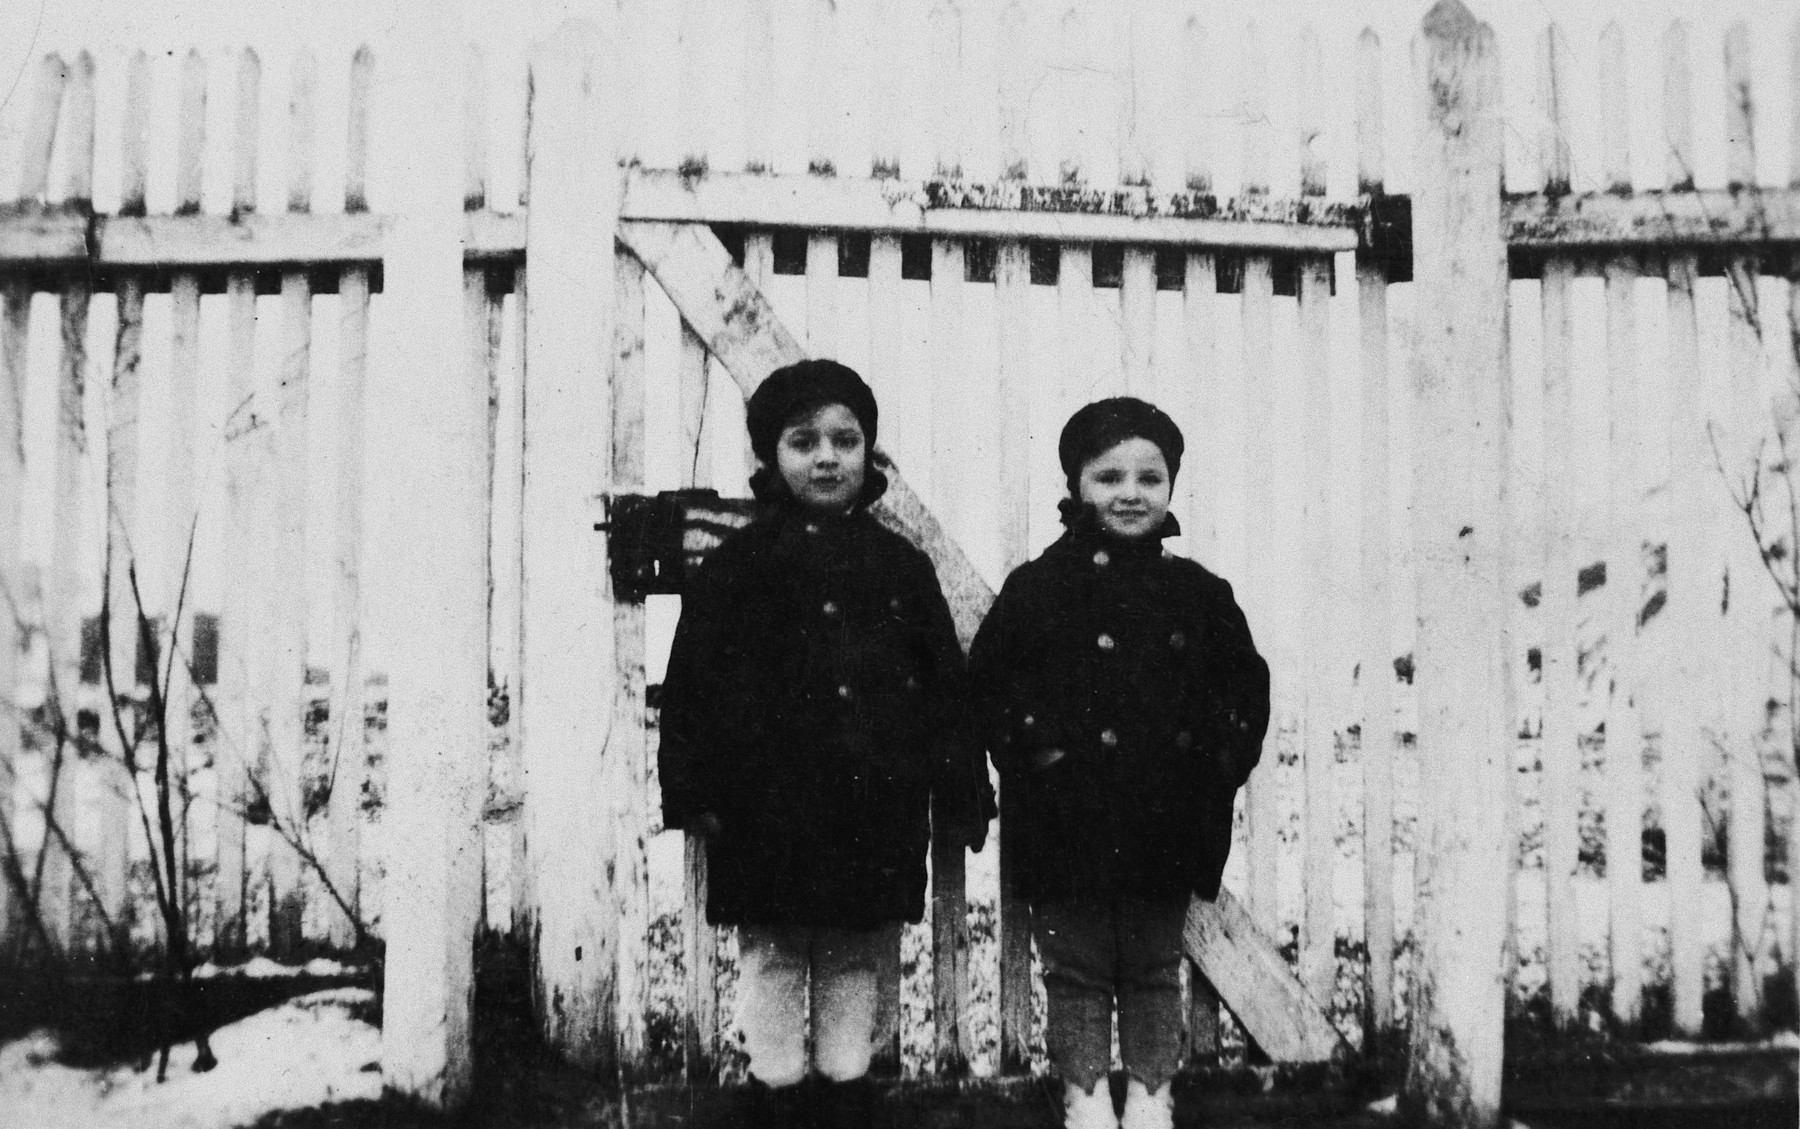 Agnes and Zsuzsi Laszlo stand together next to a wooden fence in their small farming community of Pogony Puszta.